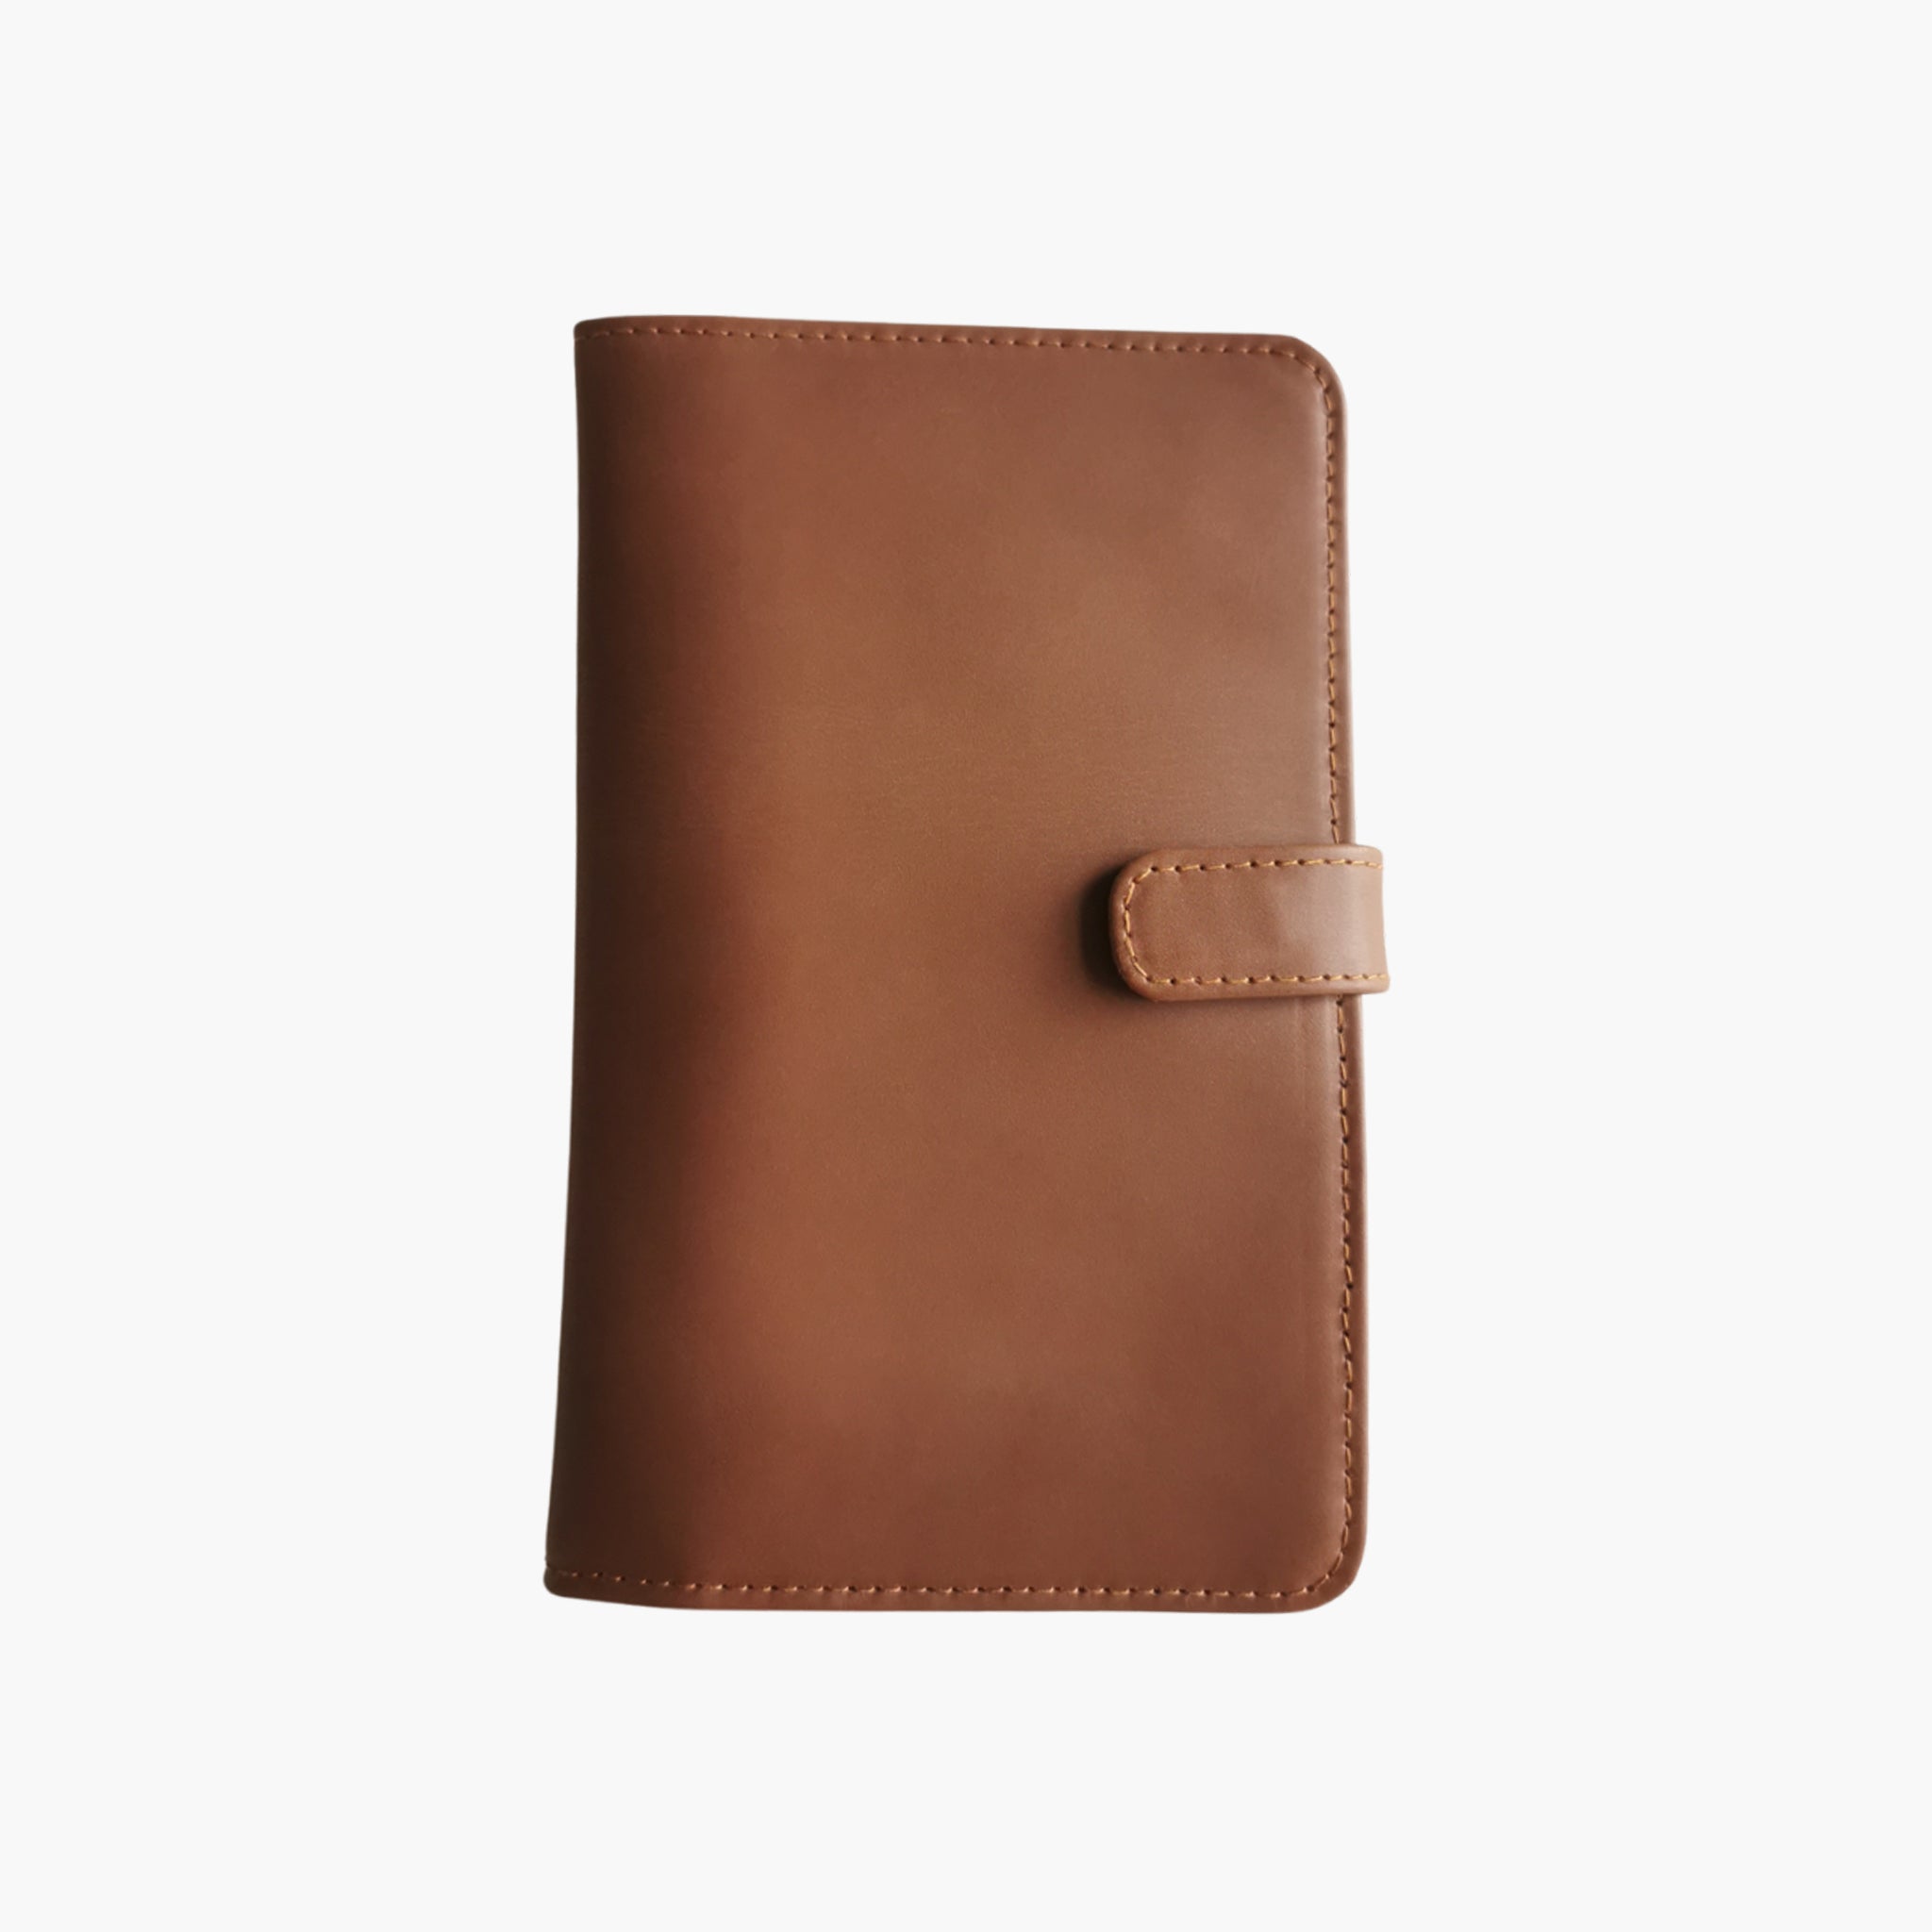 A5 Notebook Cover Organiser in Tan Leather by Duffle&Co